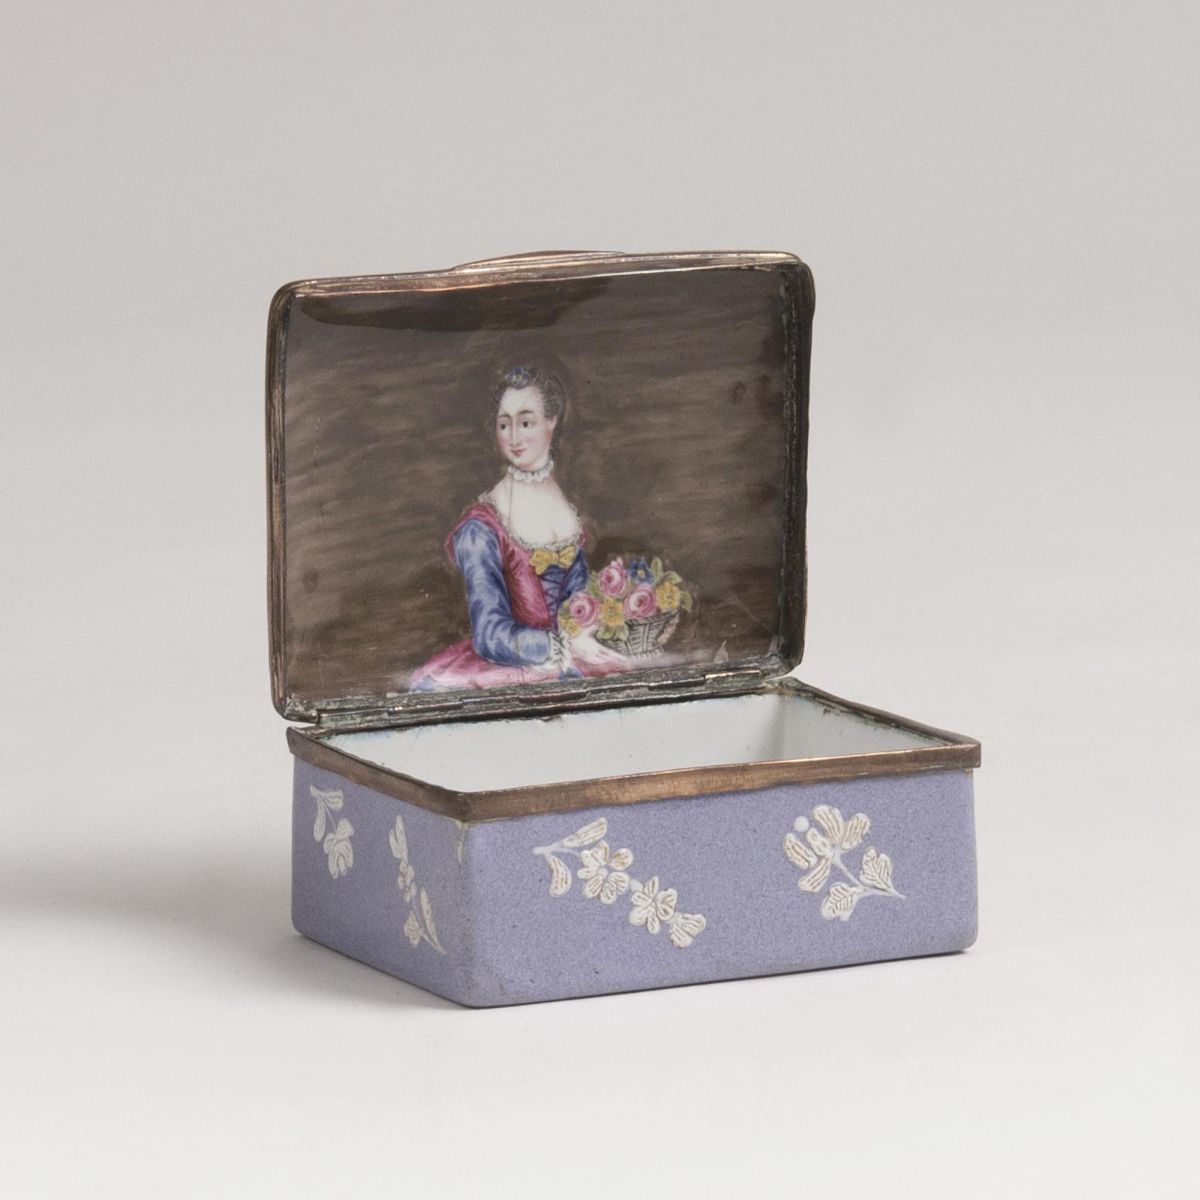 An Enamel Snuff Box with Fine Flower Relief